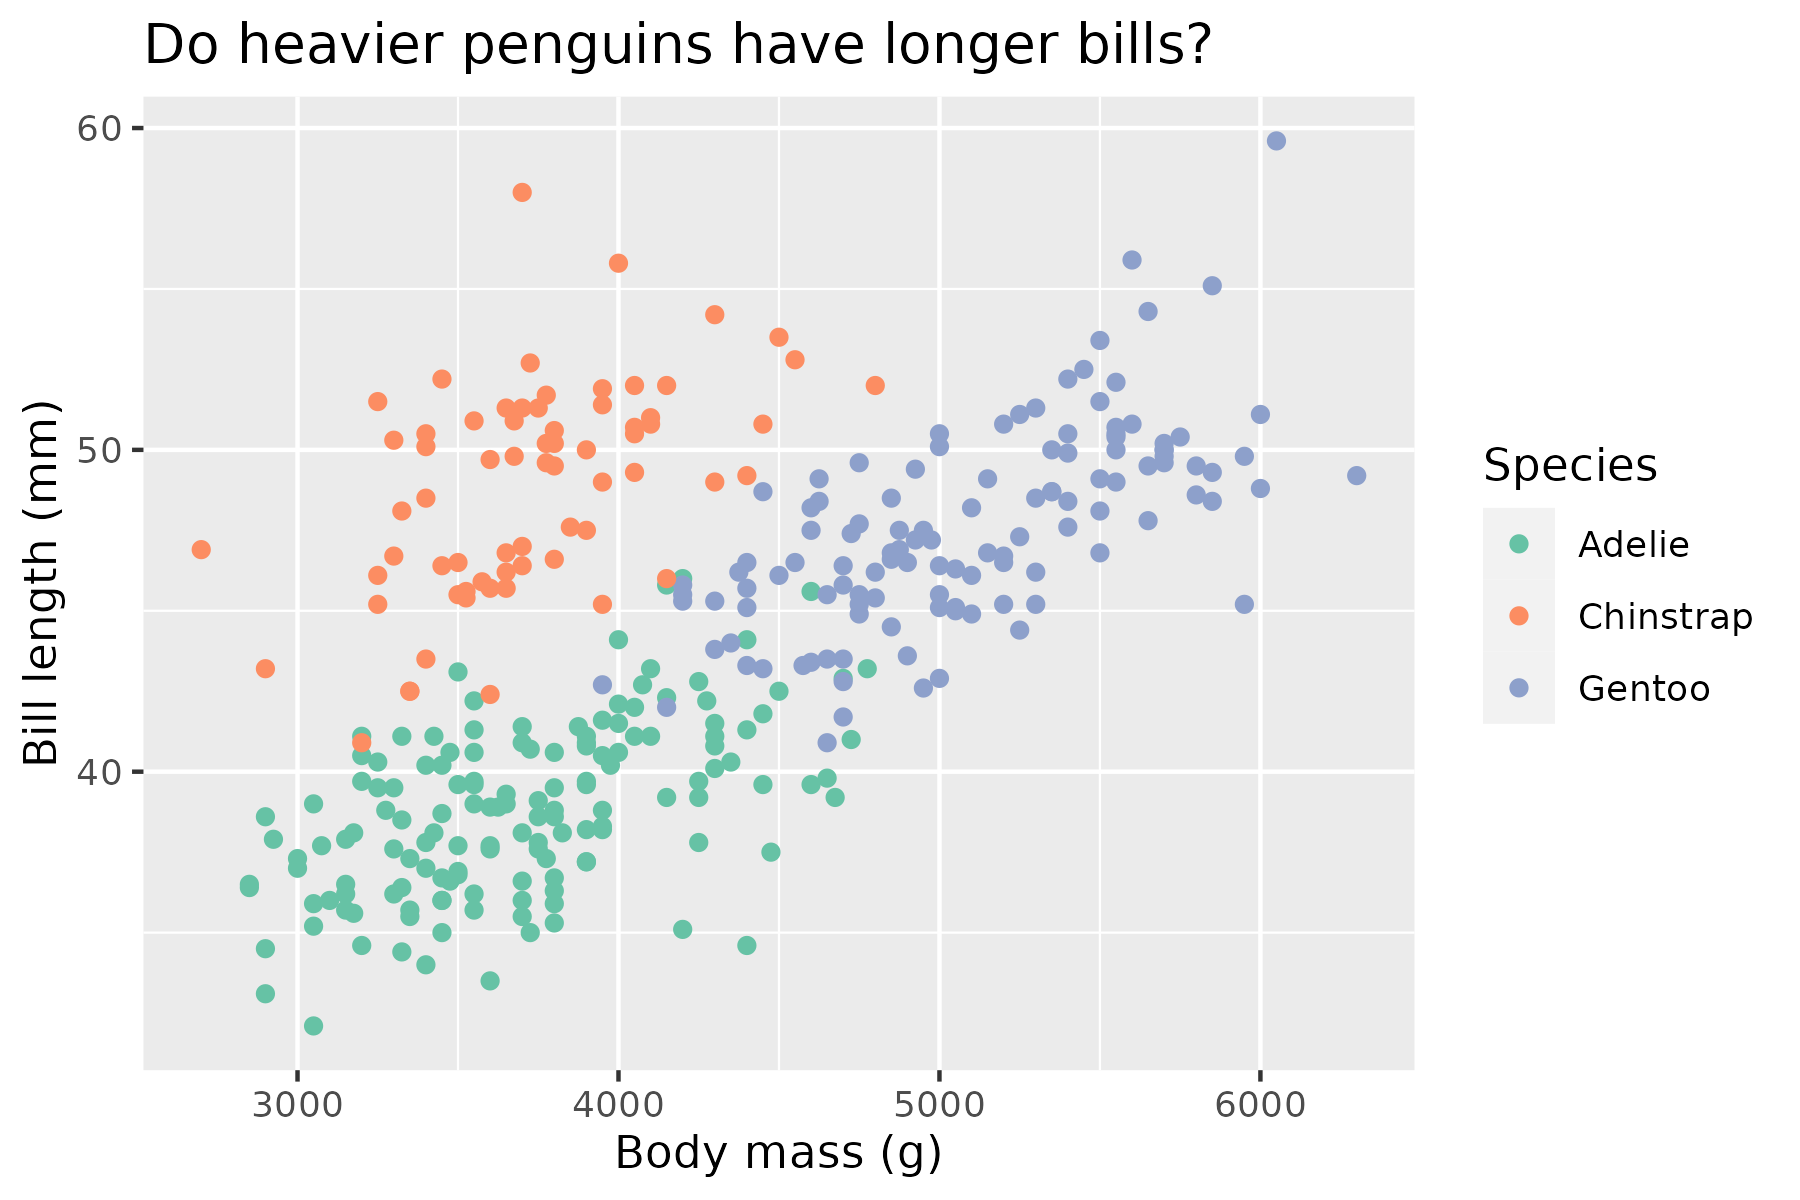 A scatter plot showing bill length (mm) vs body mass (g) for three penguin species which are seperated by colour; Adelie, Chinstrap and Gentoo. The plot is styled using standard basic ggplot2 theme; the plot background is grey with white gridlines. Title (Do heavier penguins have longer bills?) is left justified and the legend is to the right of the plot.